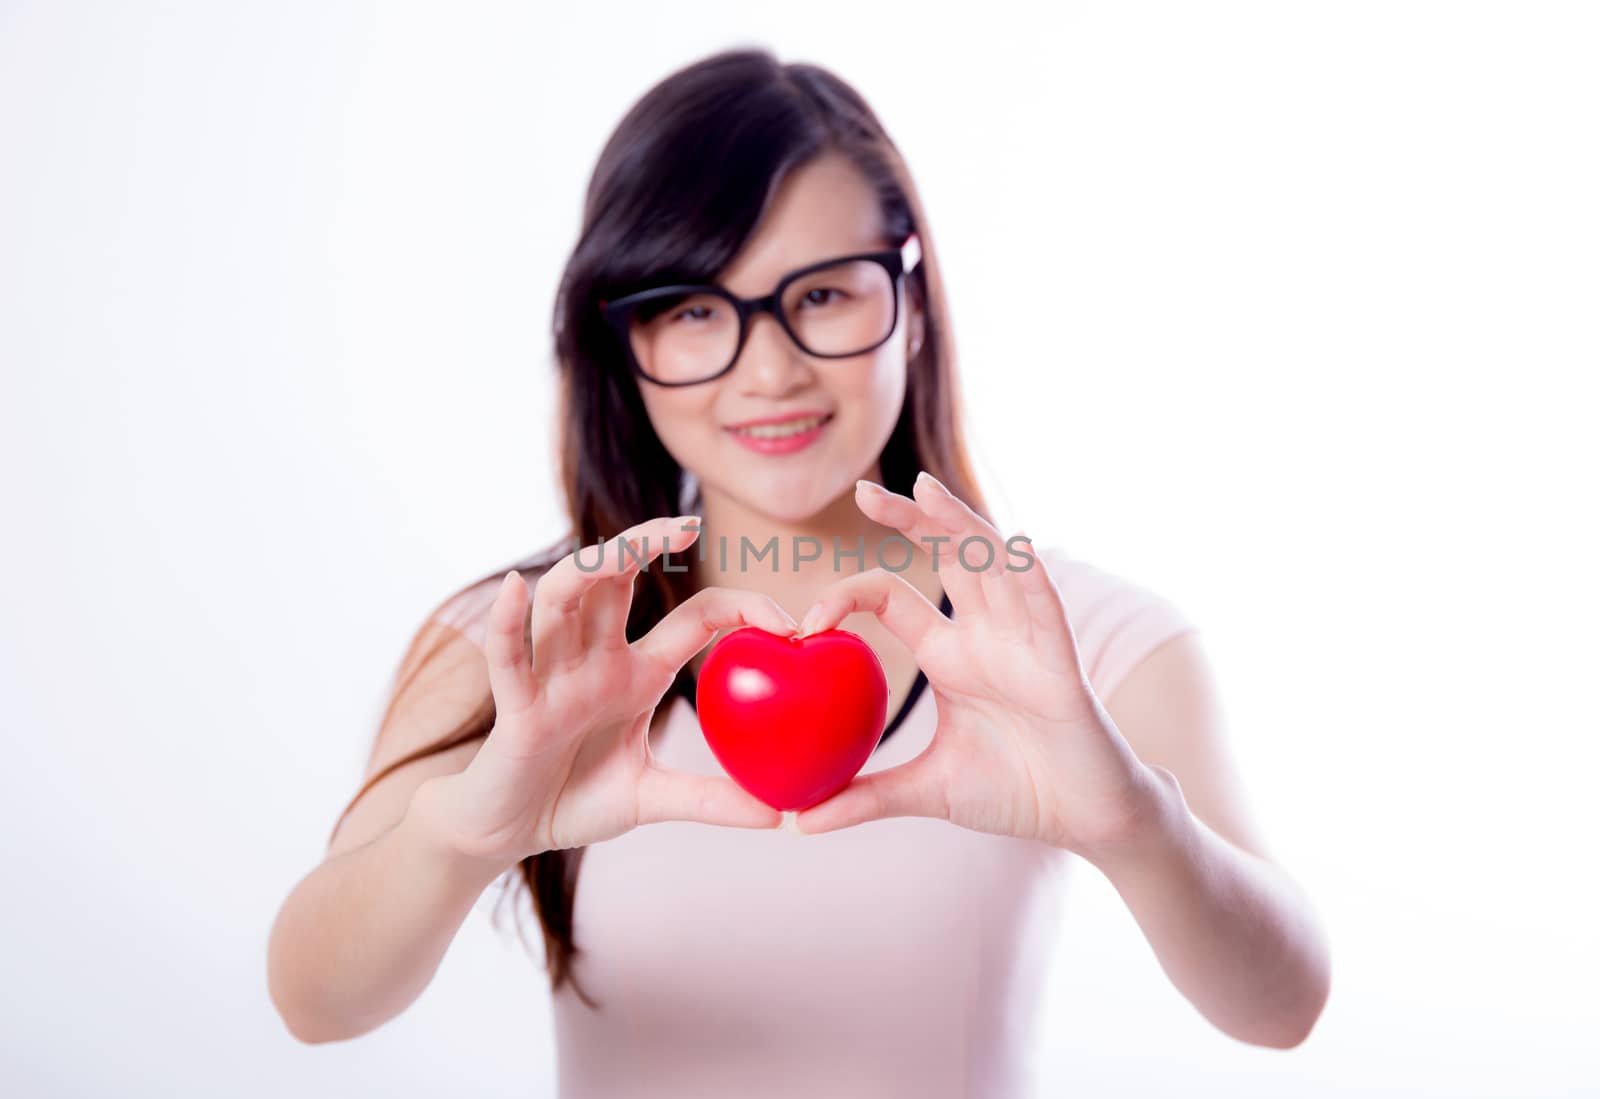 Young asian woman show heart hand sign on white background.